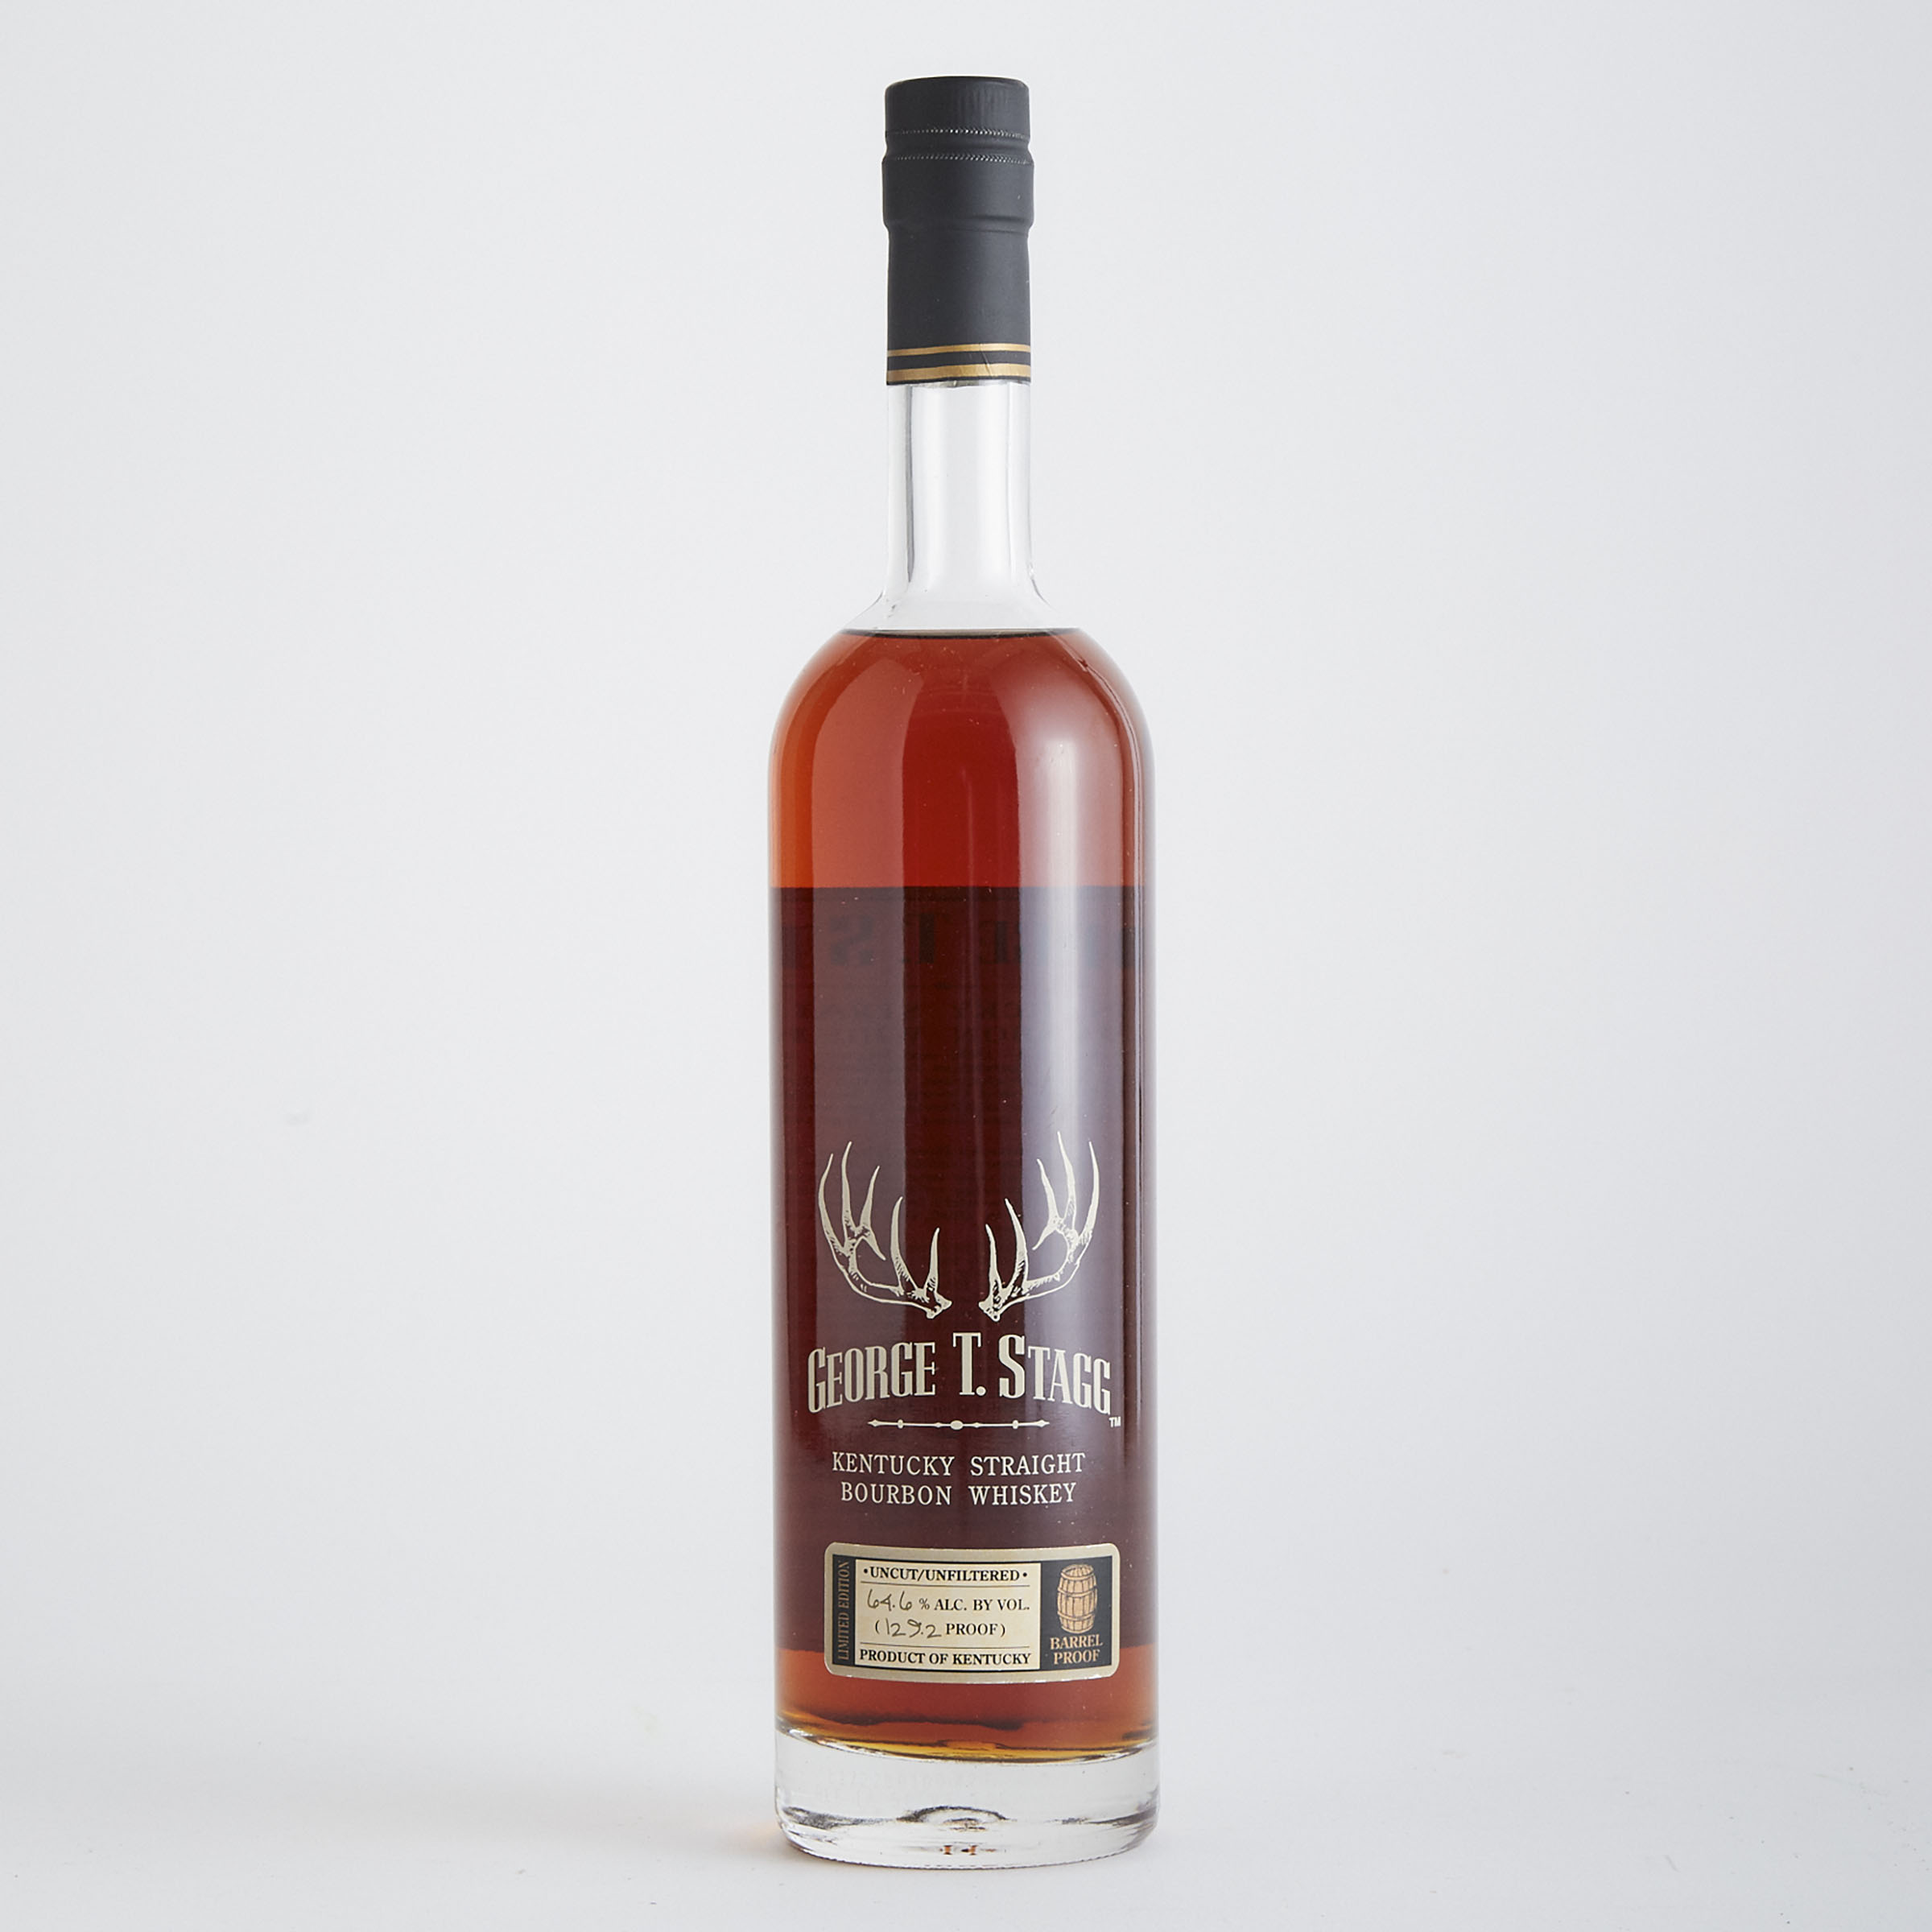 GEORGE T. STAGG KENTUCKY STRAIGHT BOURBON WHISKEY (ONE 750 ML?)